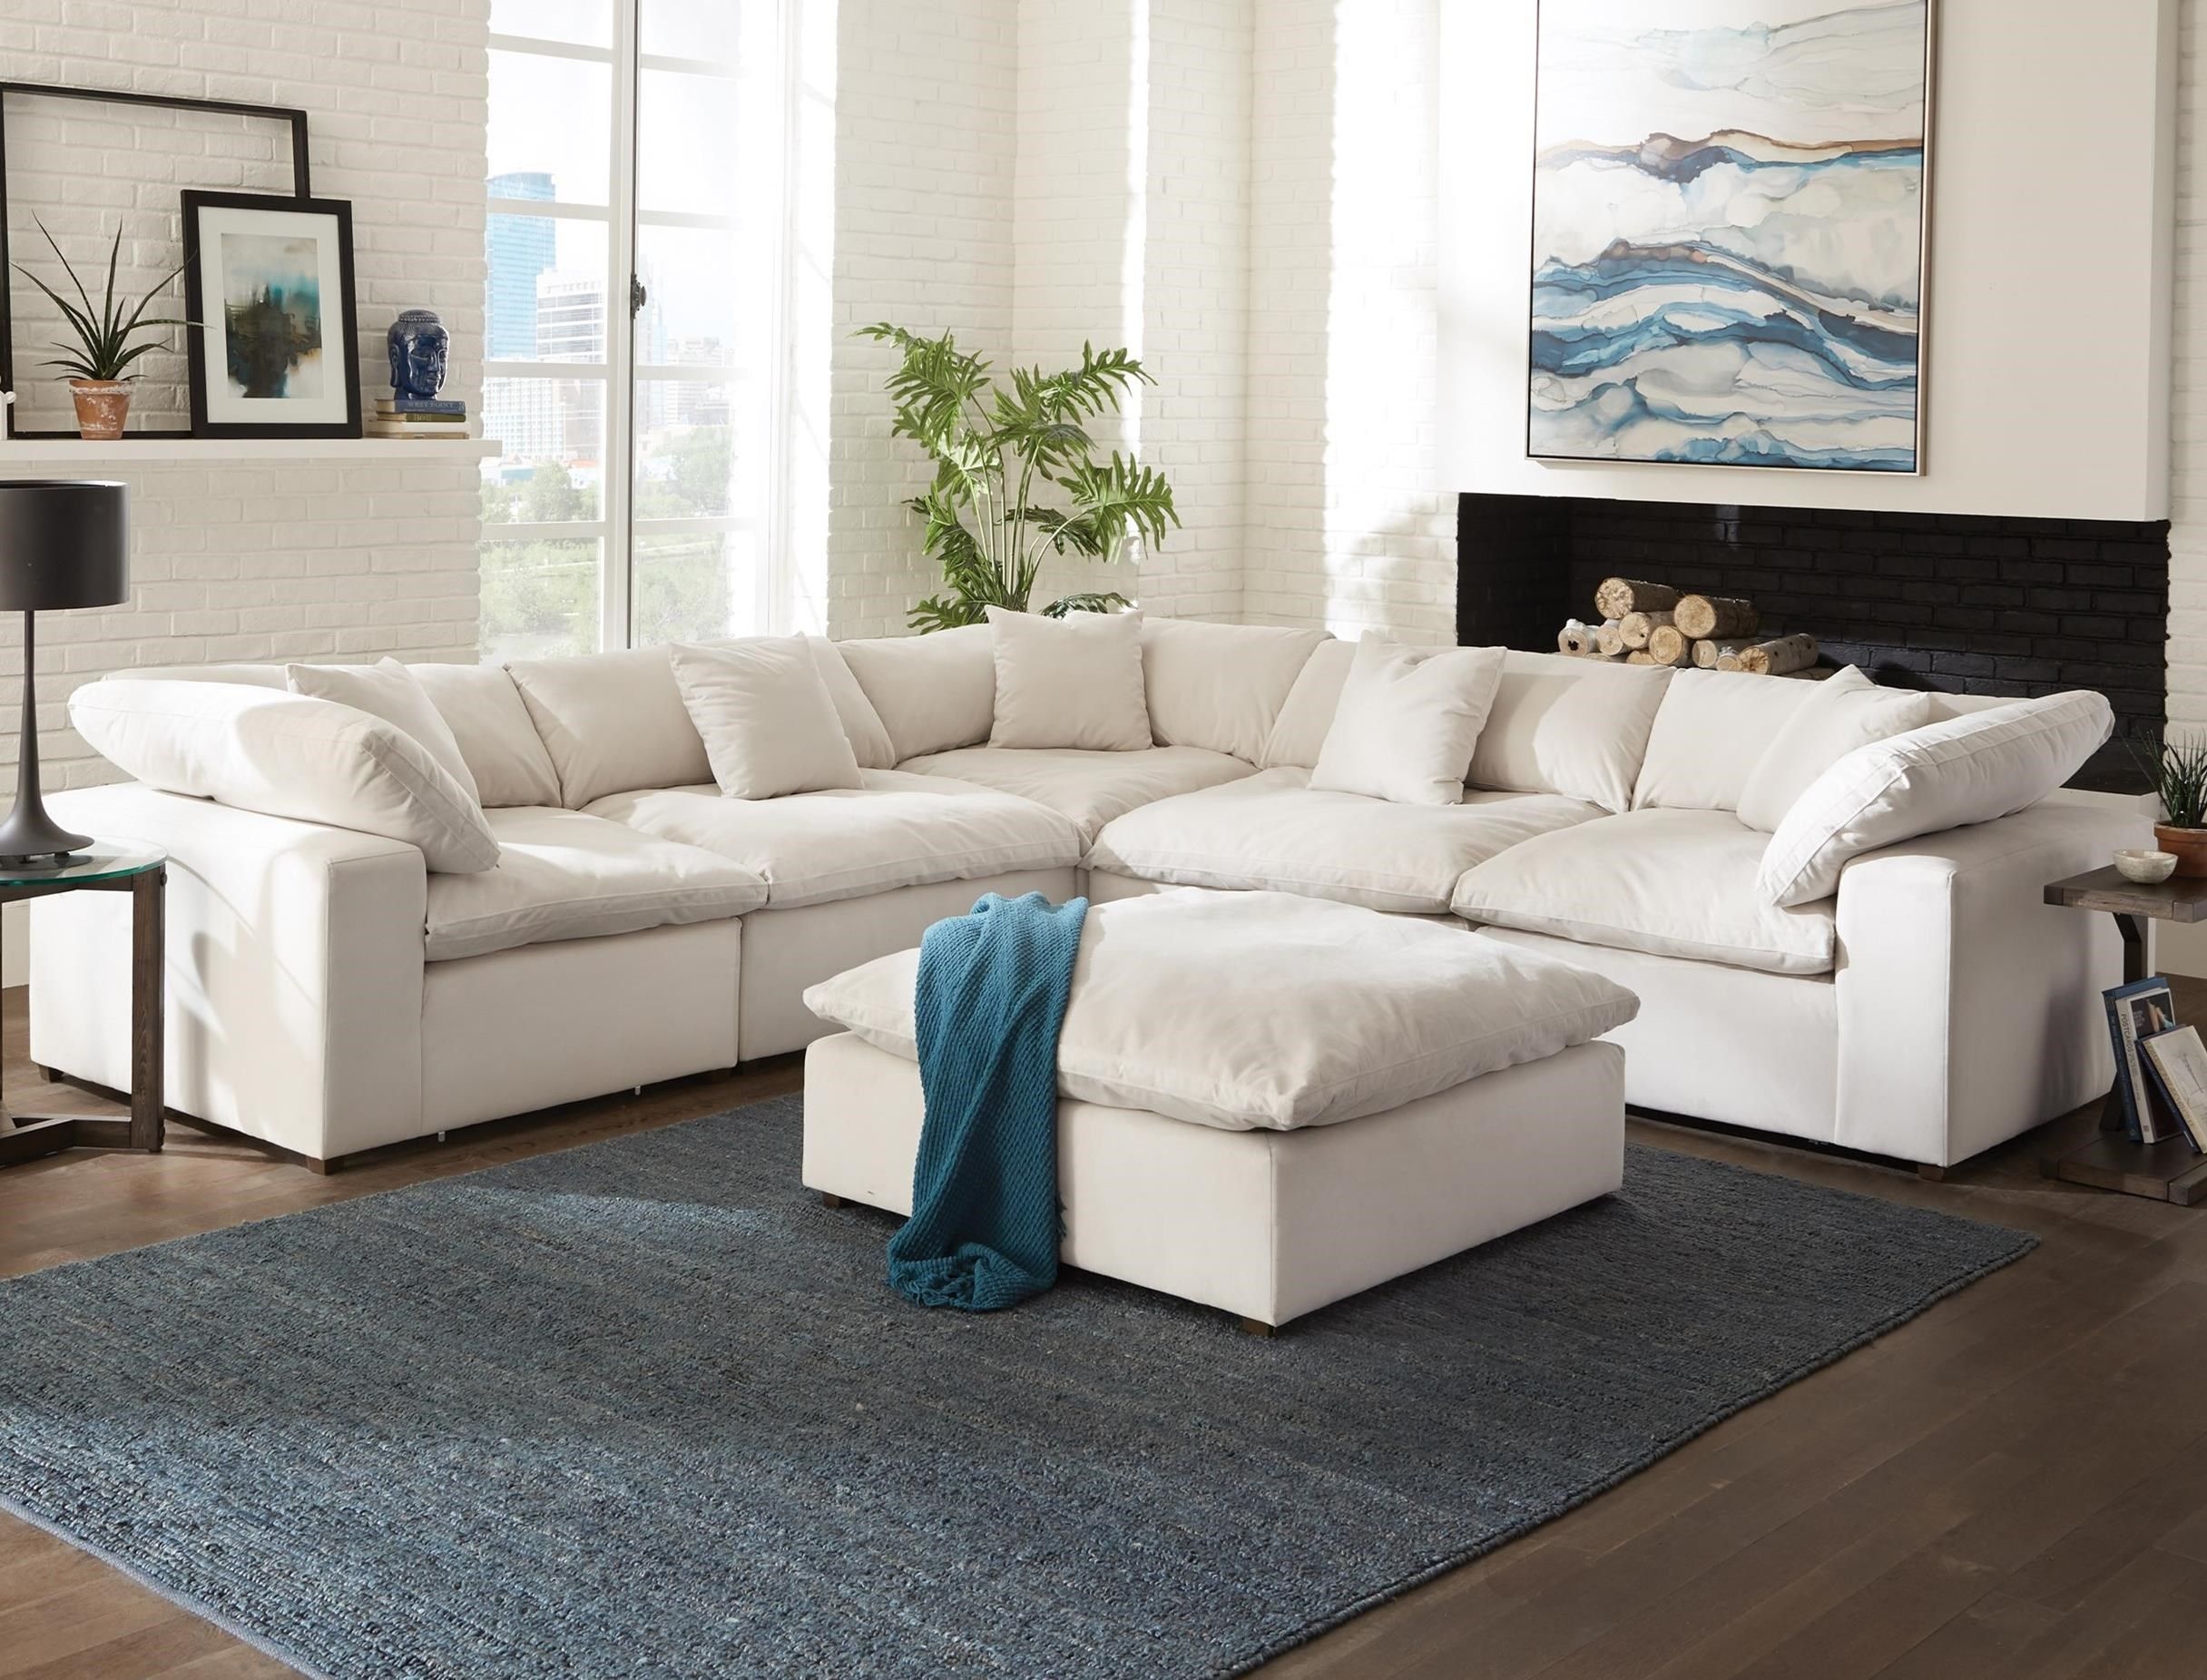 Jackson Furniture Posh Contemporary L Shaped Sectional Sofa | Standard Intended For Modern L Shaped Sofa Sectionals (Gallery 10 of 20)